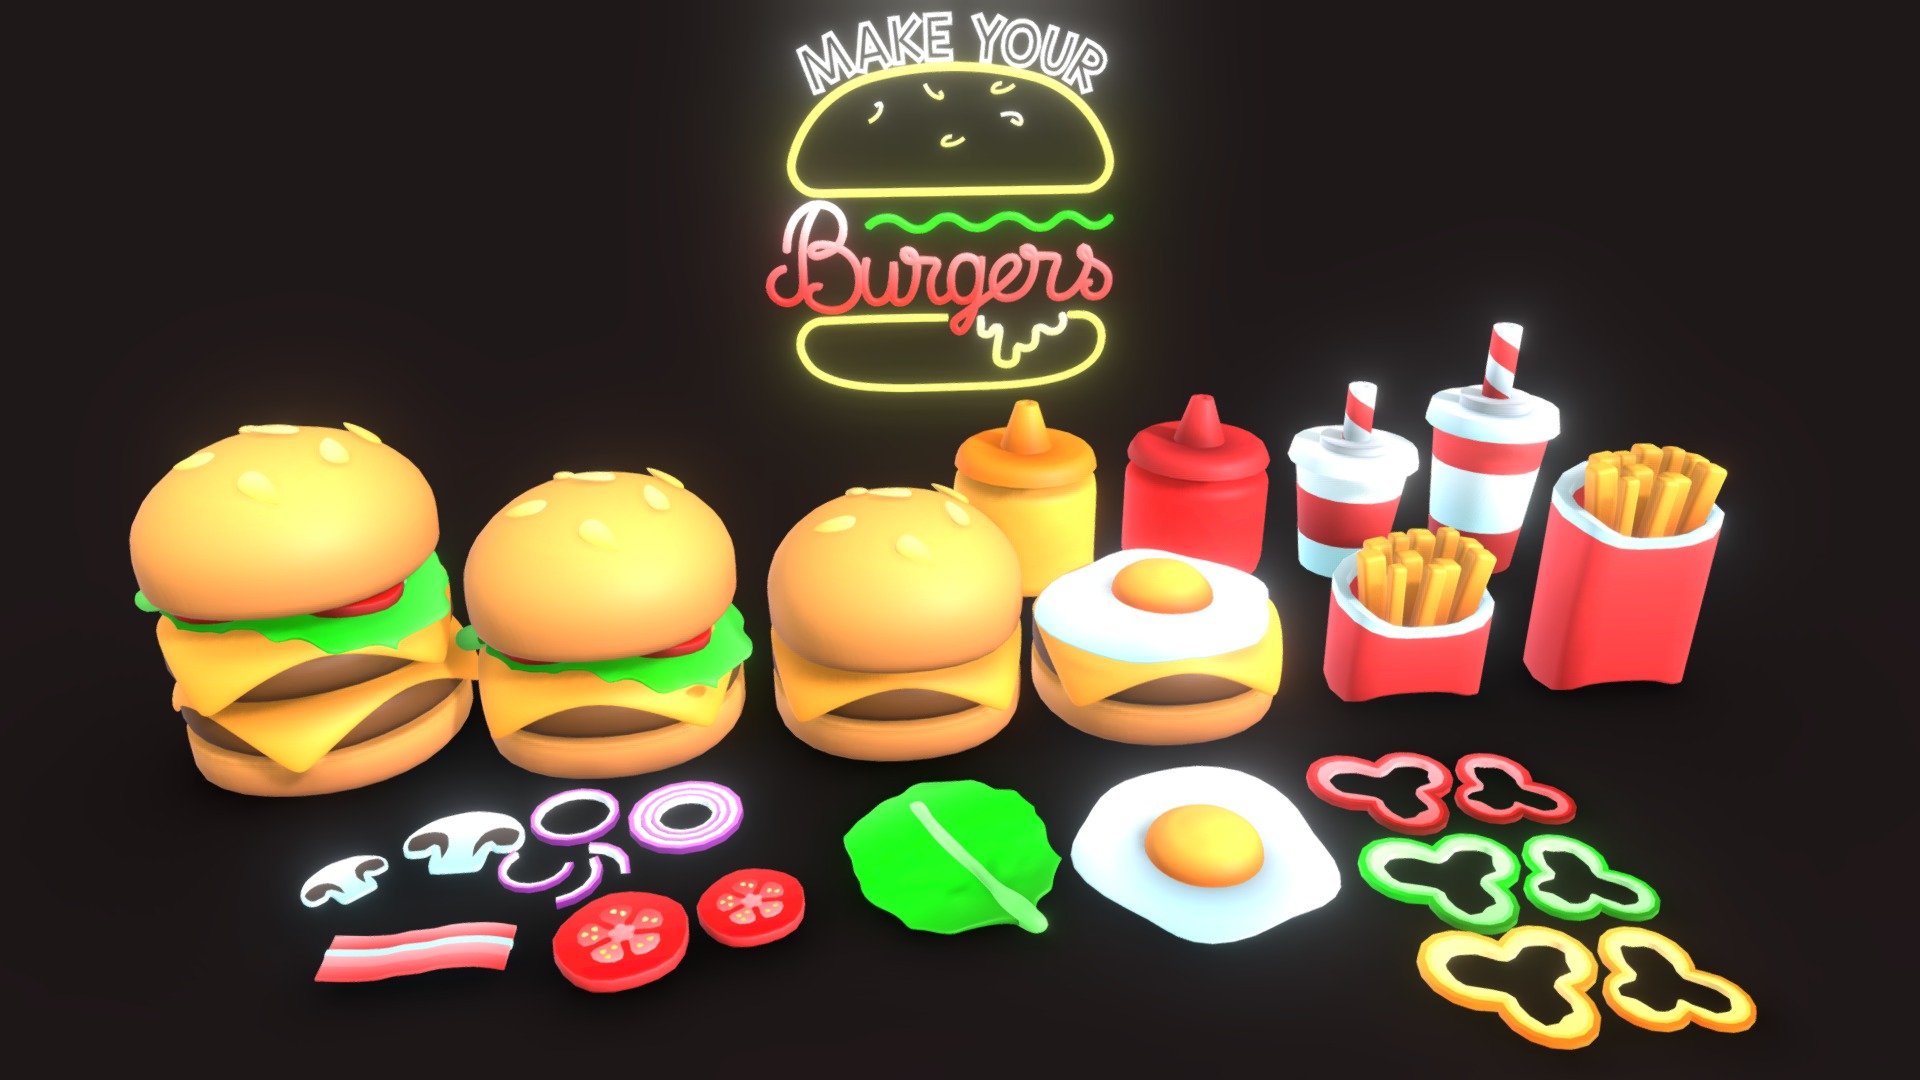 Let's create the burgers of your dreams for video games in unreal or unity, or any animation movie !

✔️ Can be rendered with lit or unlit shader for a more cartoon look.

✔️ Modular asset pack

✔️ Two level of details 

✔️ Single texture map with gradient atlas color - .psd &amp; .jpg

✔️ Separated .fbx.

🔍 Poly details : H - L 🔍

🍞 Top Bread: 3k tris - 1236 tris

🍞 Bottom Bread: 1k tris - 464 tris

🥩 Steak: 768 tris - 336 tris

🧀 Cheese: 5.1k tris - 1k tris

🍳 Egg: 2.2k tris - 560 tris

🍅 Tomato: 9.9k tris - 3.5k tris

🧅 Onions: 70- 200 tris - 70- 200 tris

🥓 Bacon: 2.1k tris - 1k tris

🍄 Mushroom: 1.5k tris - 886 tris

🌶️ Peppers: 550 tris - 550 tris

🍟  Fries : 4k tris -  2.1k tris

🥤 Drinks: 3k tris - 1.3k tris

🥫 Sauces: 760 tris - 356 tris

💡 Vintage neons: 23k tris - 6.5k tris

🥗 Salad: 10.6 tris - 740 tris

✔️ Commercial use of the assets
❌ Cannot be sold as any sort of asset/resource on a any marketplace.

Please feel free to contact me if you have any problem with the assets 3d model